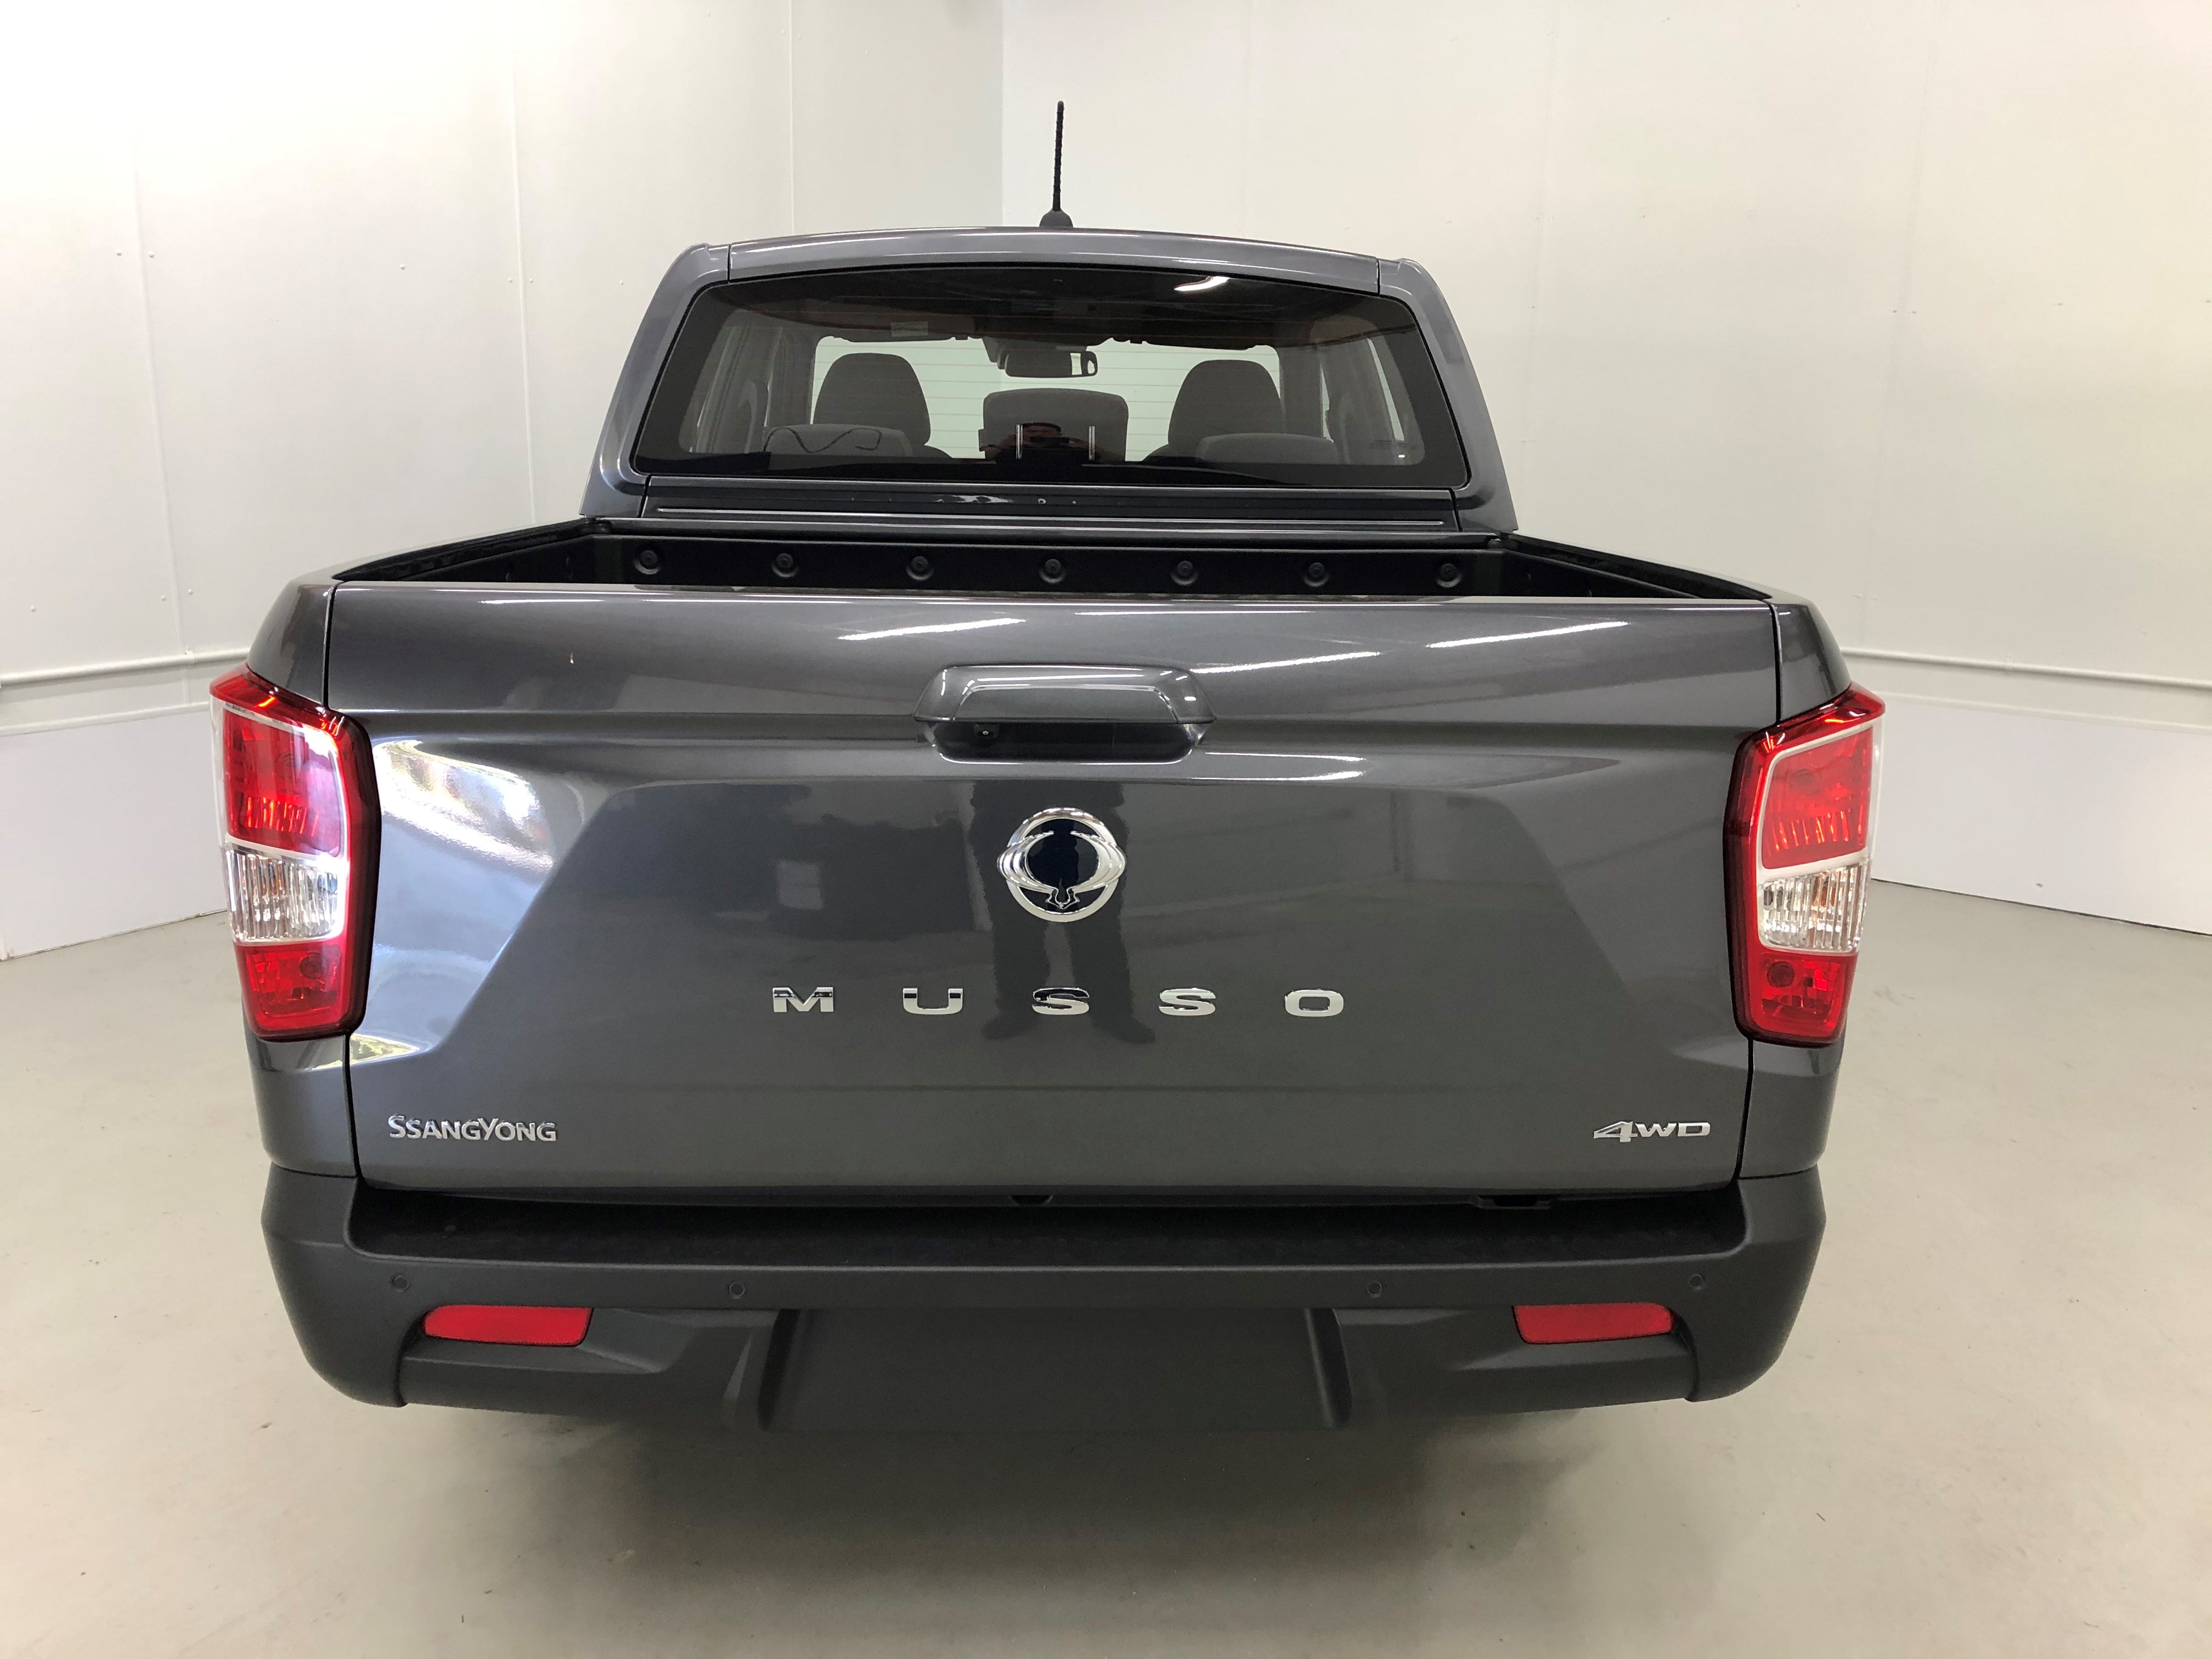 2020 SsangYong Musso Q200 ELX Ute Image 6